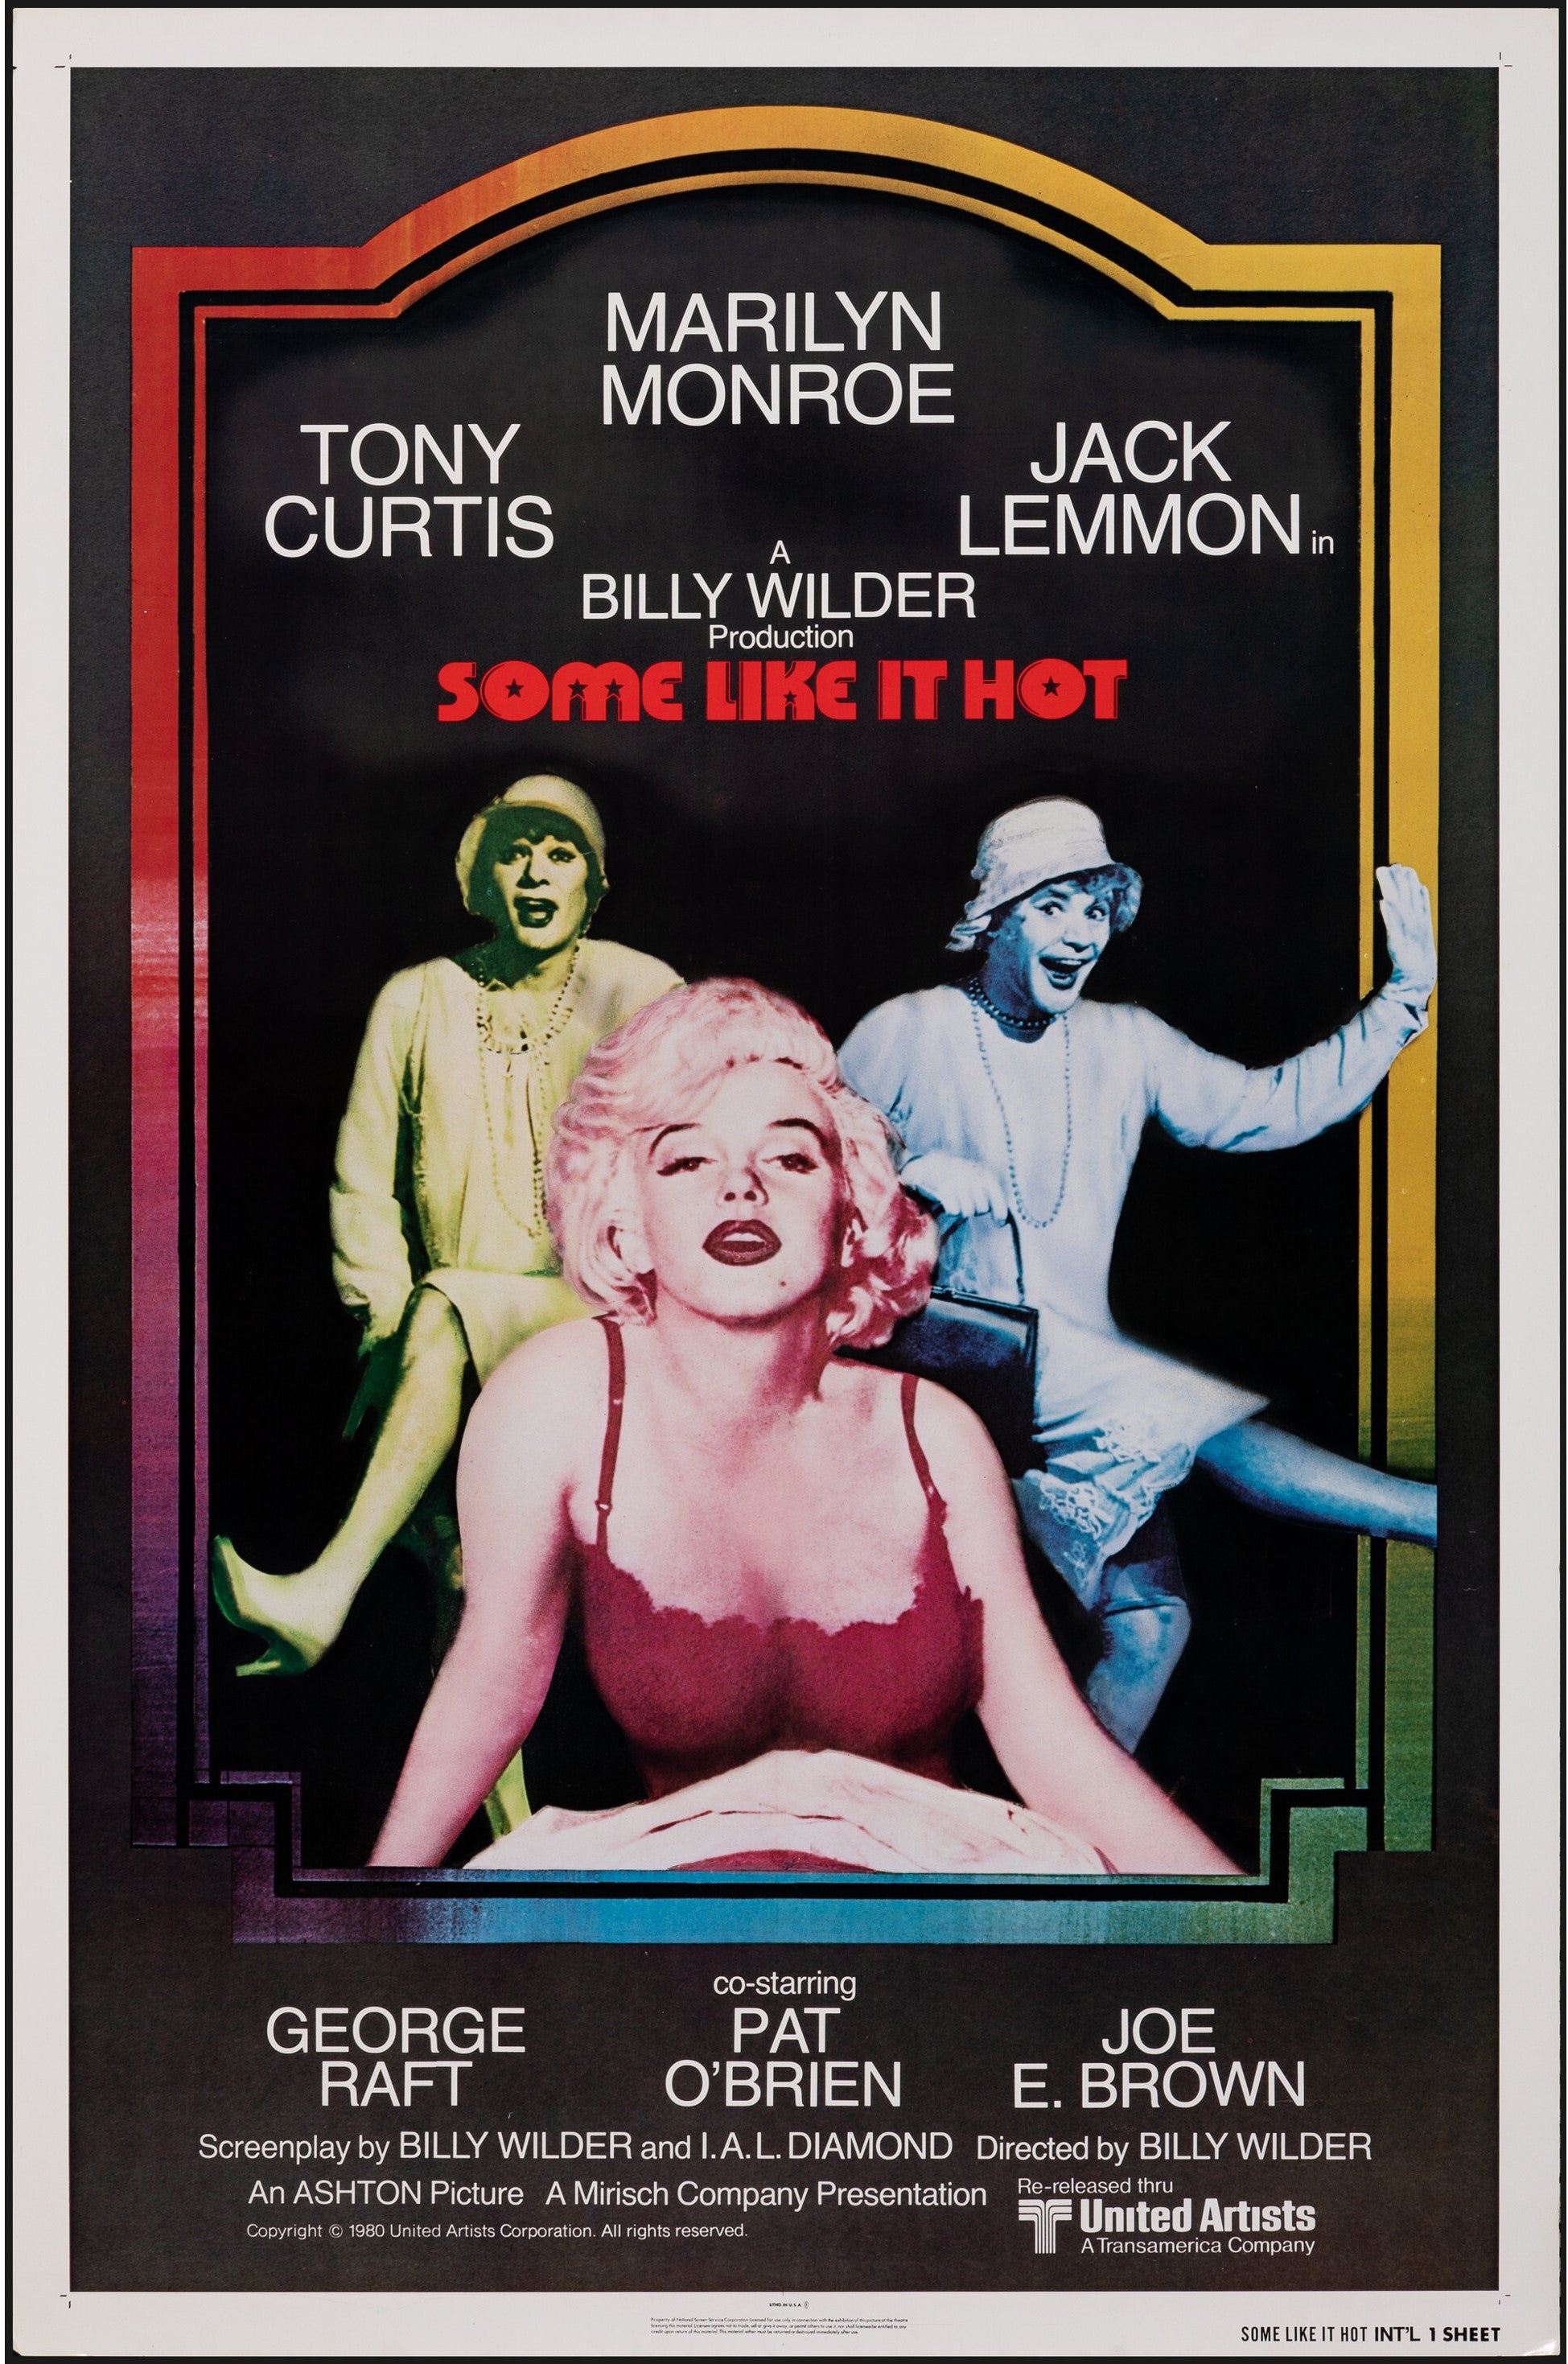 SOME LIKE IT HOT (R1980)